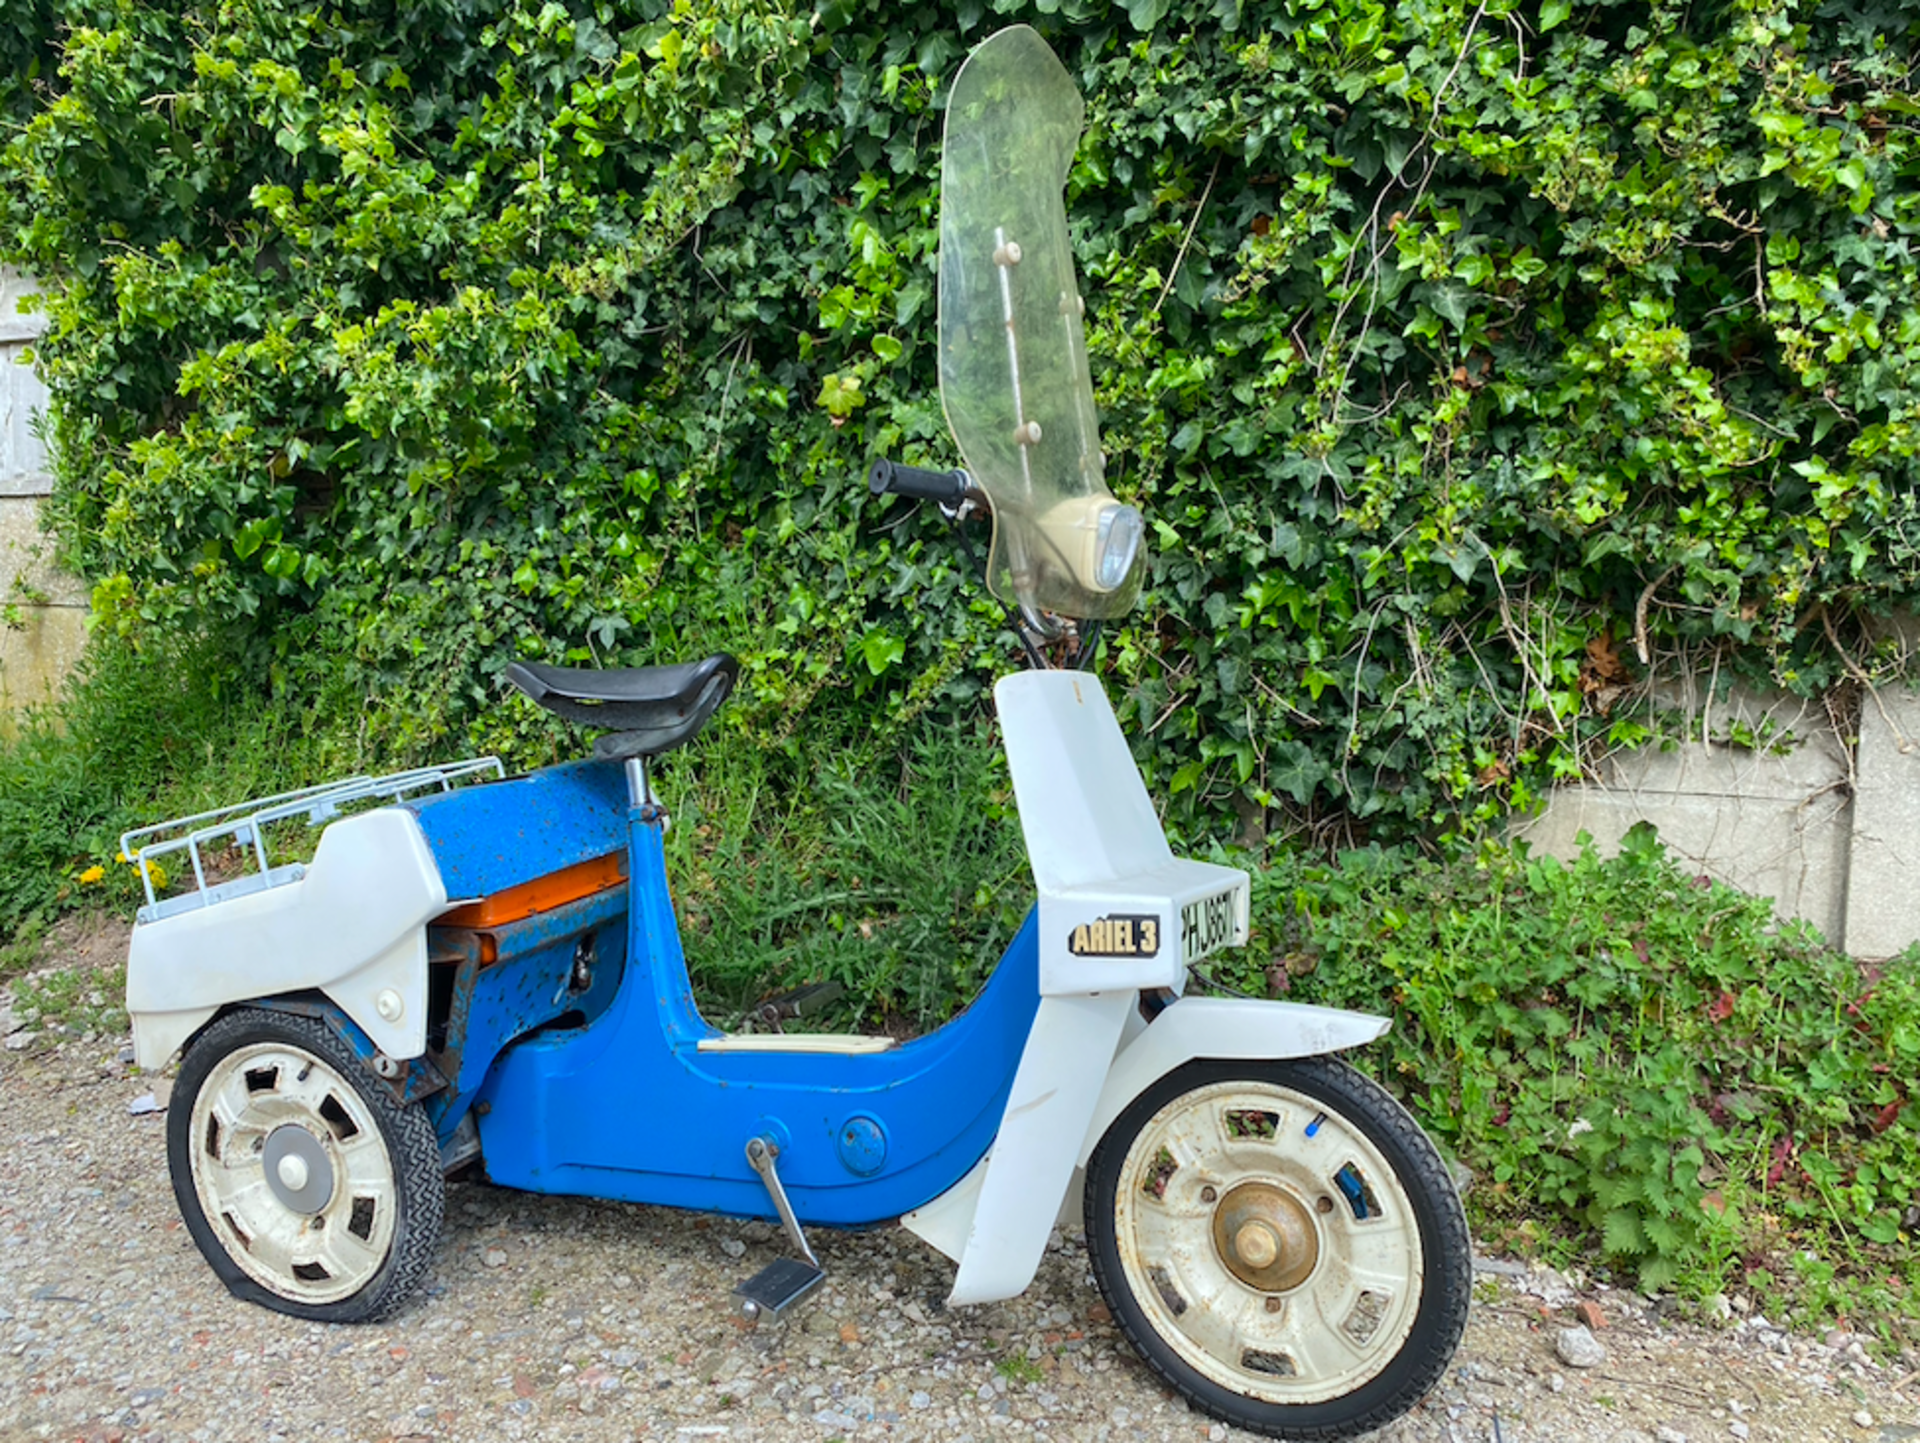 1972 BSA ARIEL 3 TRICYCLE ***NO RESERVE***